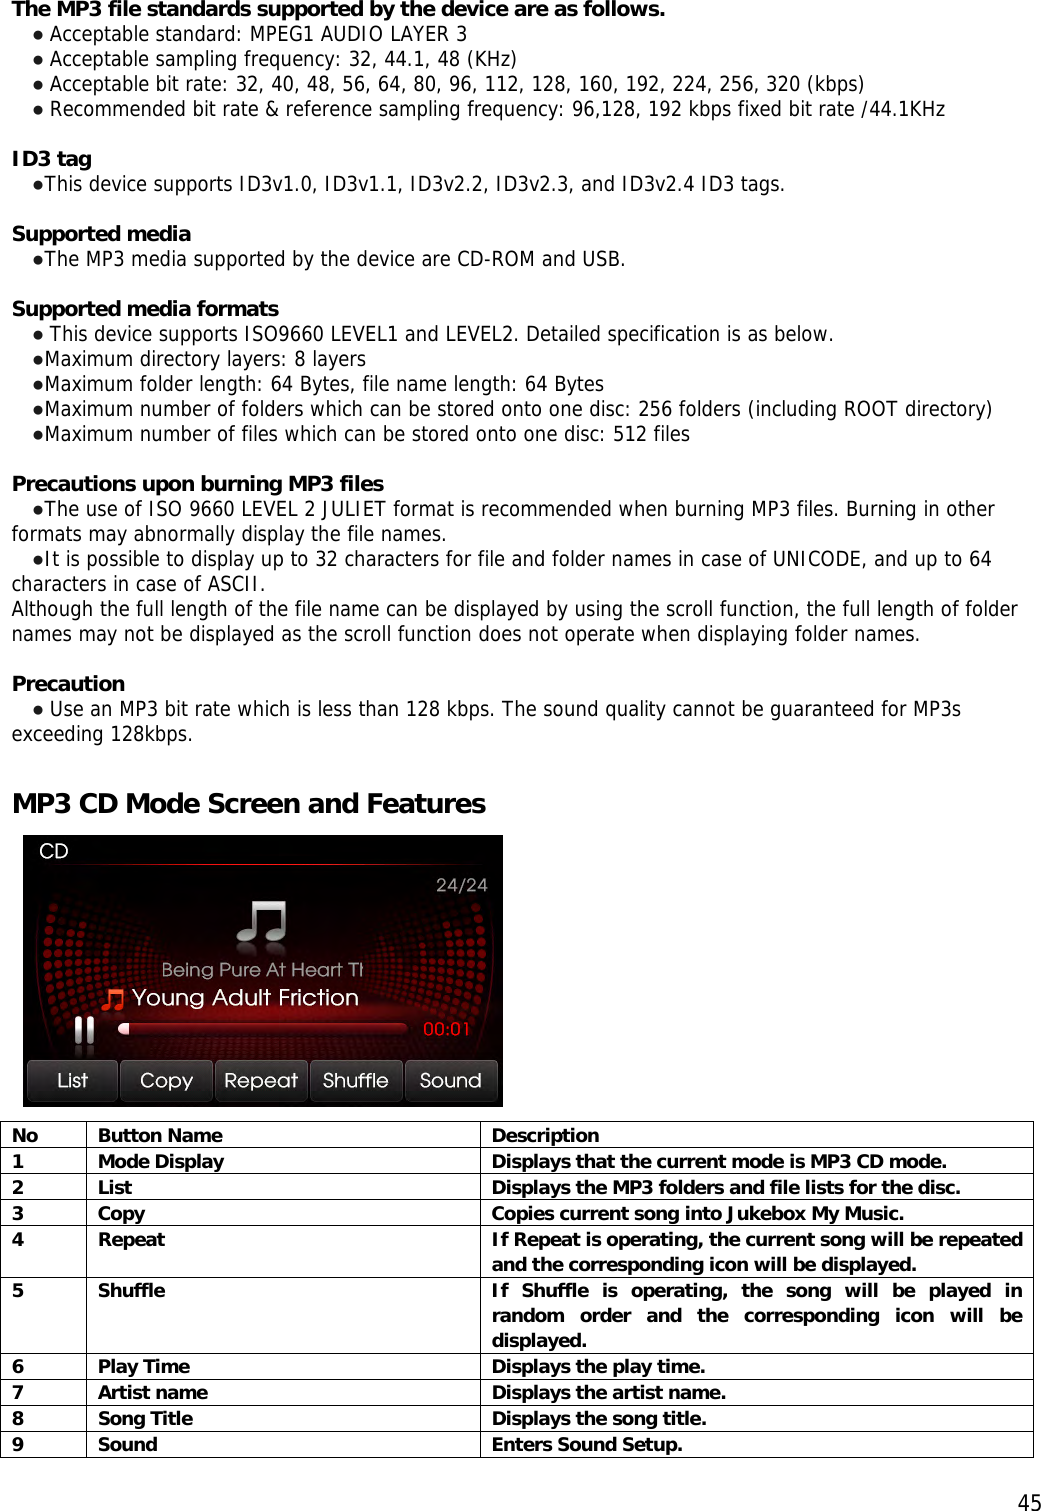  45The MP3 file standards supported by the device are as follows. ● Acceptable standard: MPEG1 AUDIO LAYER 3 ● Acceptable sampling frequency: 32, 44.1, 48 (KHz) ● Acceptable bit rate: 32, 40, 48, 56, 64, 80, 96, 112, 128, 160, 192, 224, 256, 320 (kbps) ● Recommended bit rate &amp; reference sampling frequency: 96,128, 192 kbps fixed bit rate /44.1KHz  ID3 tag ●This device supports ID3v1.0, ID3v1.1, ID3v2.2, ID3v2.3, and ID3v2.4 ID3 tags.  Supported media   ●The MP3 media supported by the device are CD-ROM and USB.  Supported media formats ● This device supports ISO9660 LEVEL1 and LEVEL2. Detailed specification is as below. ●Maximum directory layers: 8 layers ●Maximum folder length: 64 Bytes, file name length: 64 Bytes ●Maximum number of folders which can be stored onto one disc: 256 folders (including ROOT directory) ●Maximum number of files which can be stored onto one disc: 512 files  Precautions upon burning MP3 files  ●The use of ISO 9660 LEVEL 2 JULIET format is recommended when burning MP3 files. Burning in other formats may abnormally display the file names. ●It is possible to display up to 32 characters for file and folder names in case of UNICODE, and up to 64 characters in case of ASCII. Although the full length of the file name can be displayed by using the scroll function, the full length of folder names may not be displayed as the scroll function does not operate when displaying folder names.   Precaution ● Use an MP3 bit rate which is less than 128 kbps. The sound quality cannot be guaranteed for MP3s exceeding 128kbps.  MP3 CD Mode Screen and Features   No Button Name  Description 1  Mode Display  Displays that the current mode is MP3 CD mode. 2  List  Displays the MP3 folders and file lists for the disc. 3  Copy  Copies current song into Jukebox My Music. 4  Repeat  If Repeat is operating, the current song will be repeated and the corresponding icon will be displayed. 5  Shuffle  If Shuffle is operating, the song will be played in random order and the corresponding icon will be displayed. 6  Play Time  Displays the play time. 7  Artist name  Displays the artist name. 8  Song Title  Displays the song title. 9  Sound  Enters Sound Setup. 